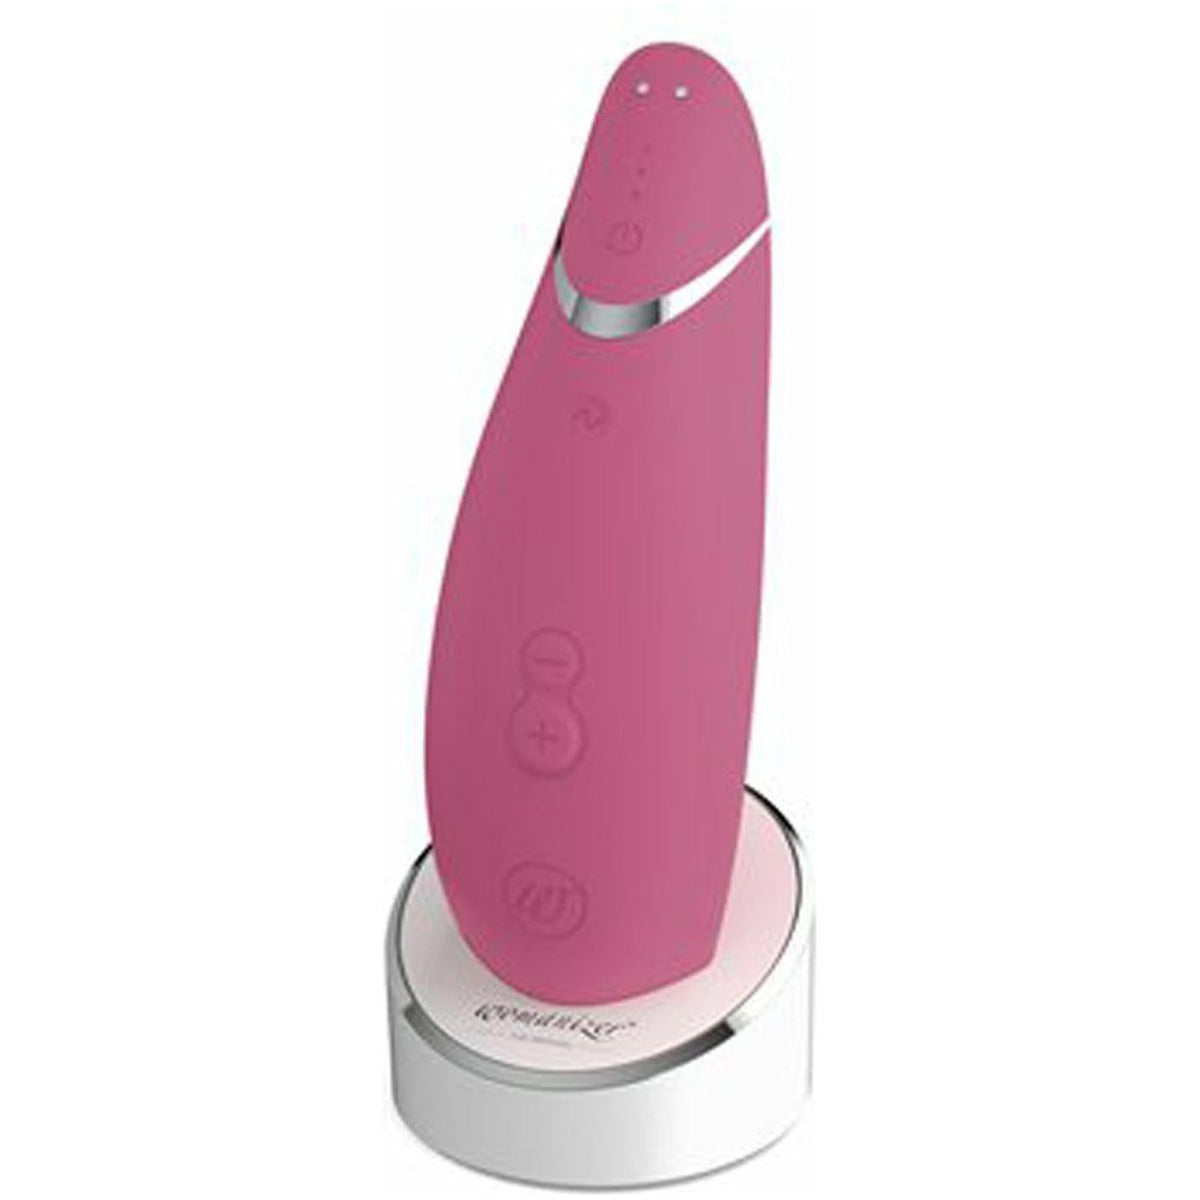 Womanizer Premium Product Stand - * Free with purchase of Womanizer Premium